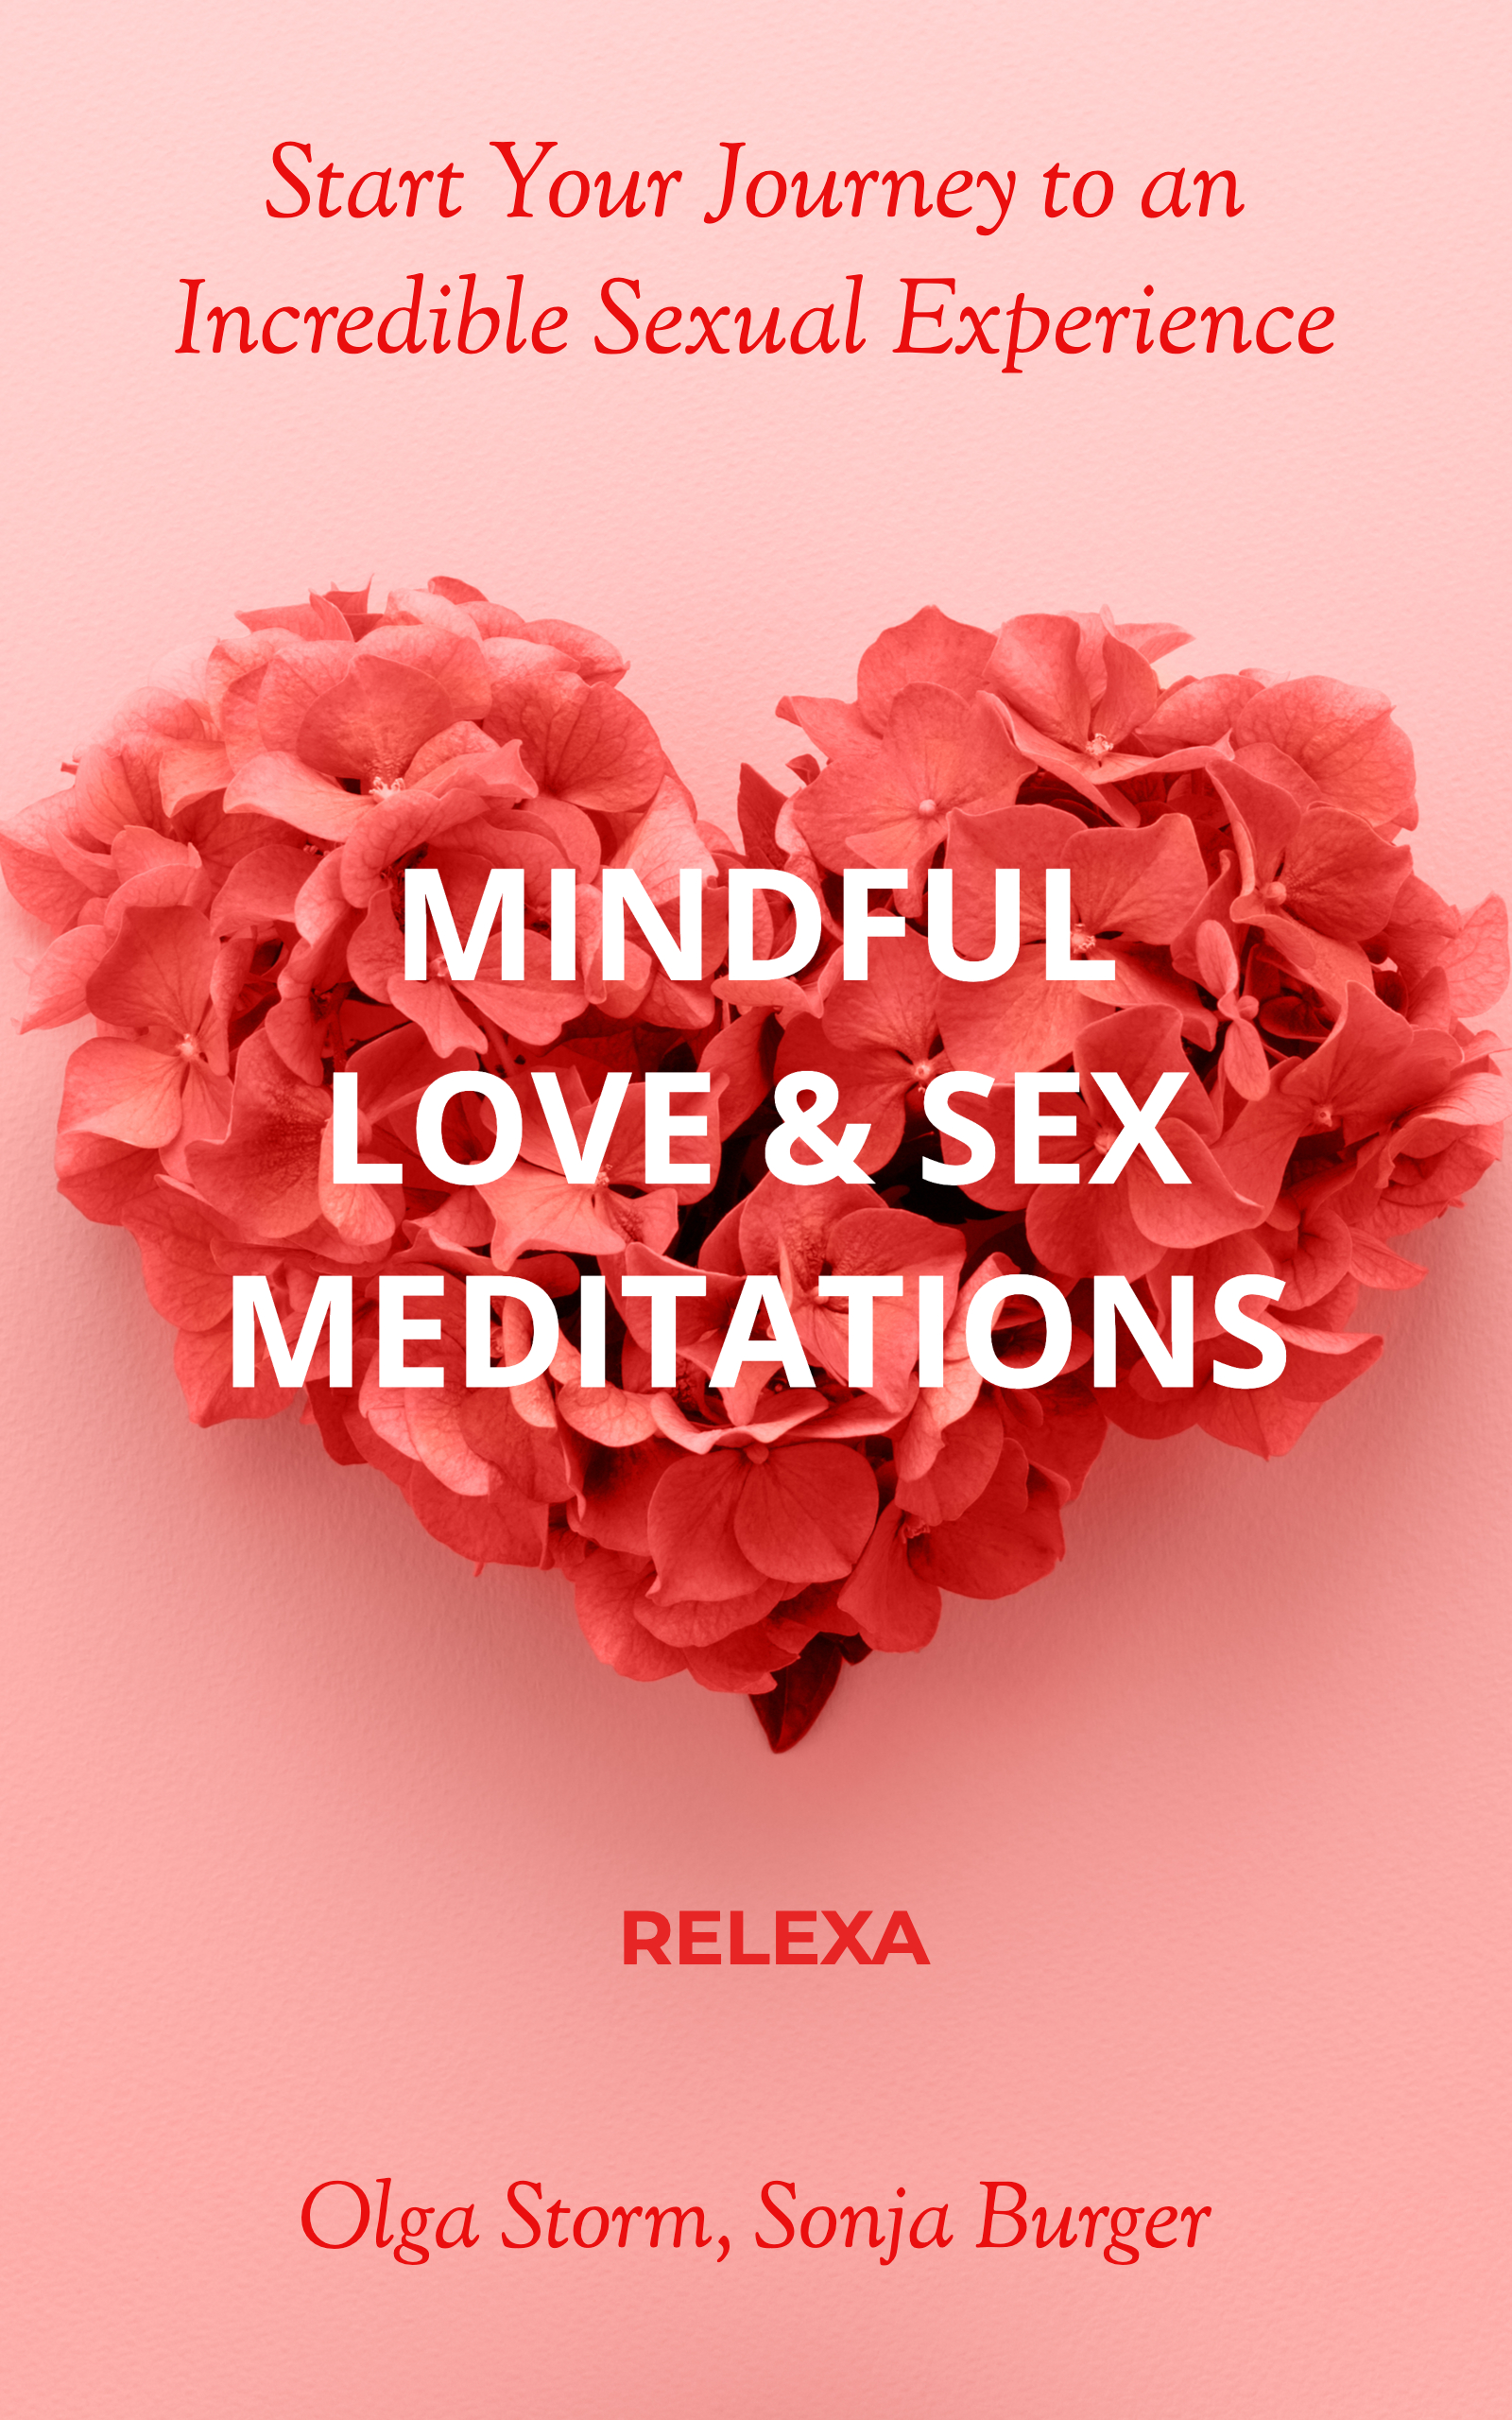 Mindful Love & Sex Meditations: Start Your Journey to an Incredible Sexual Experience.